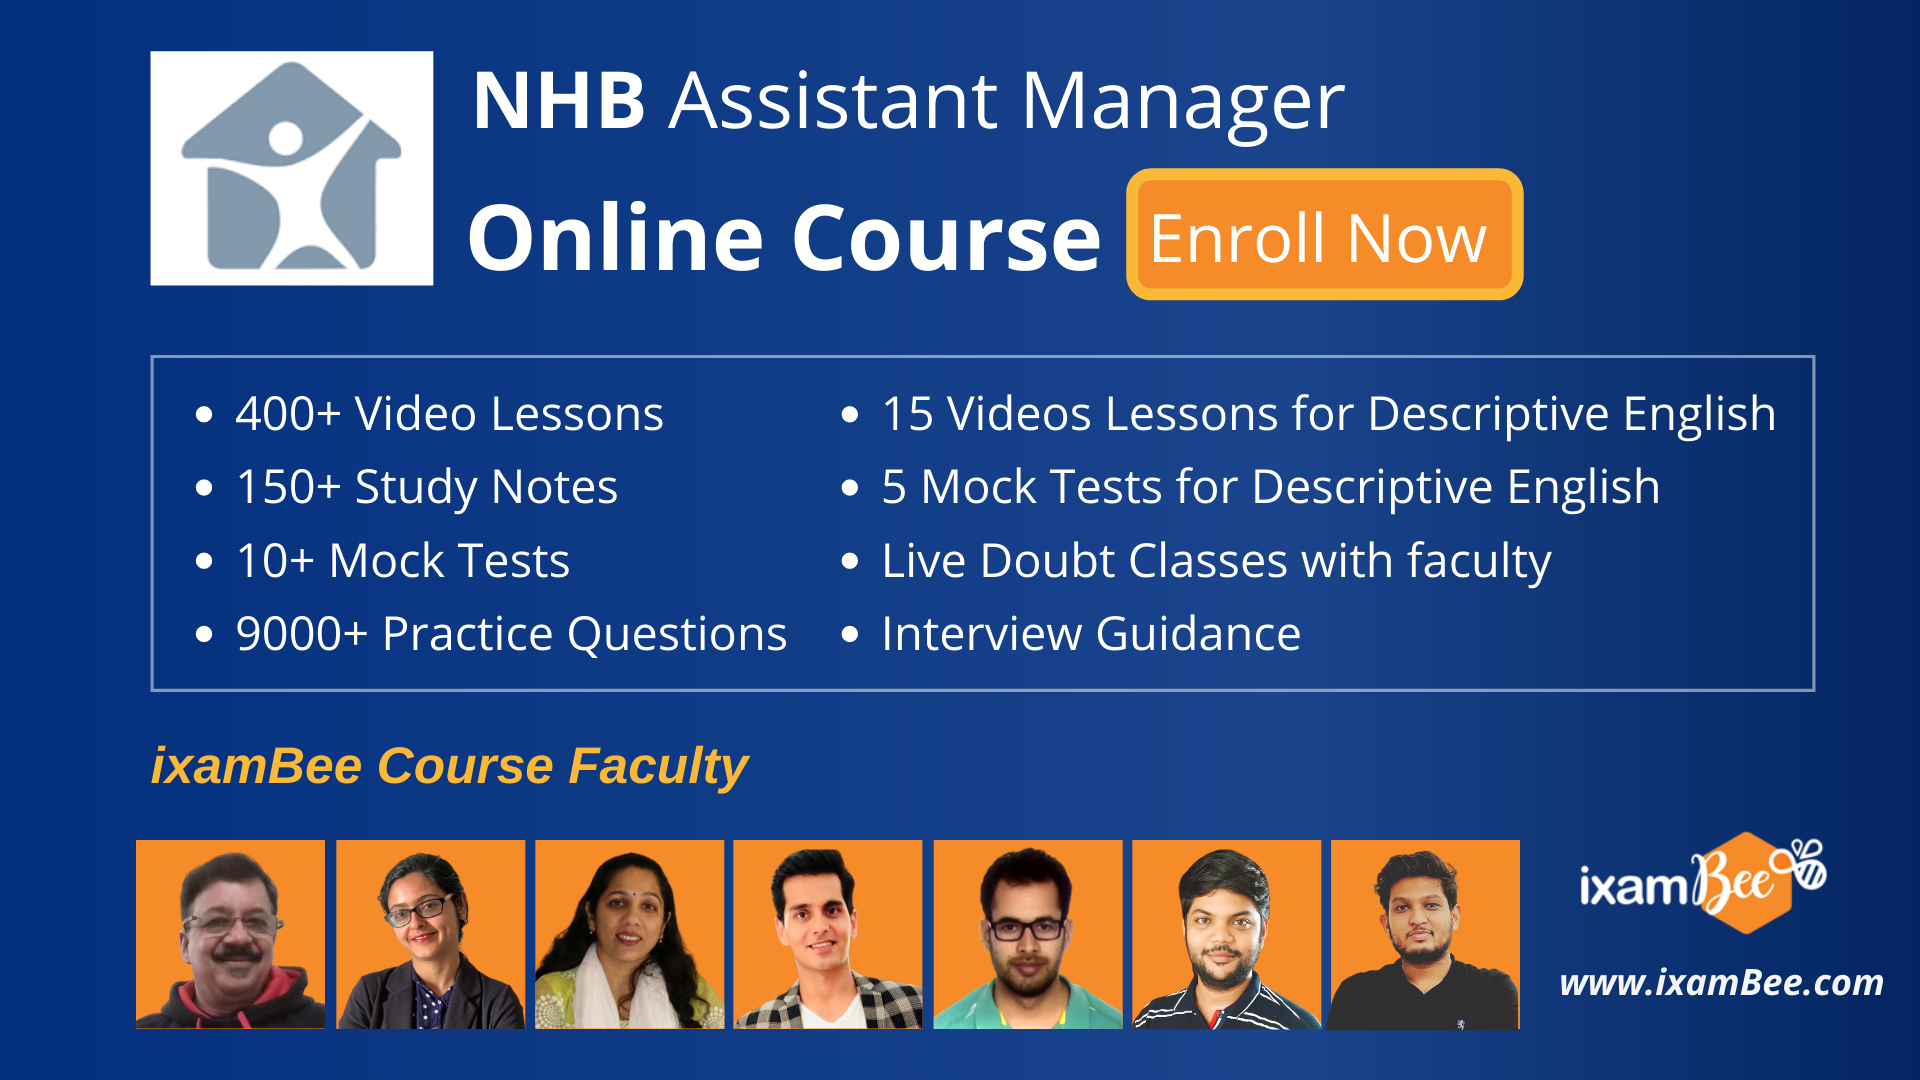 NHB Assistant Manager Online Course